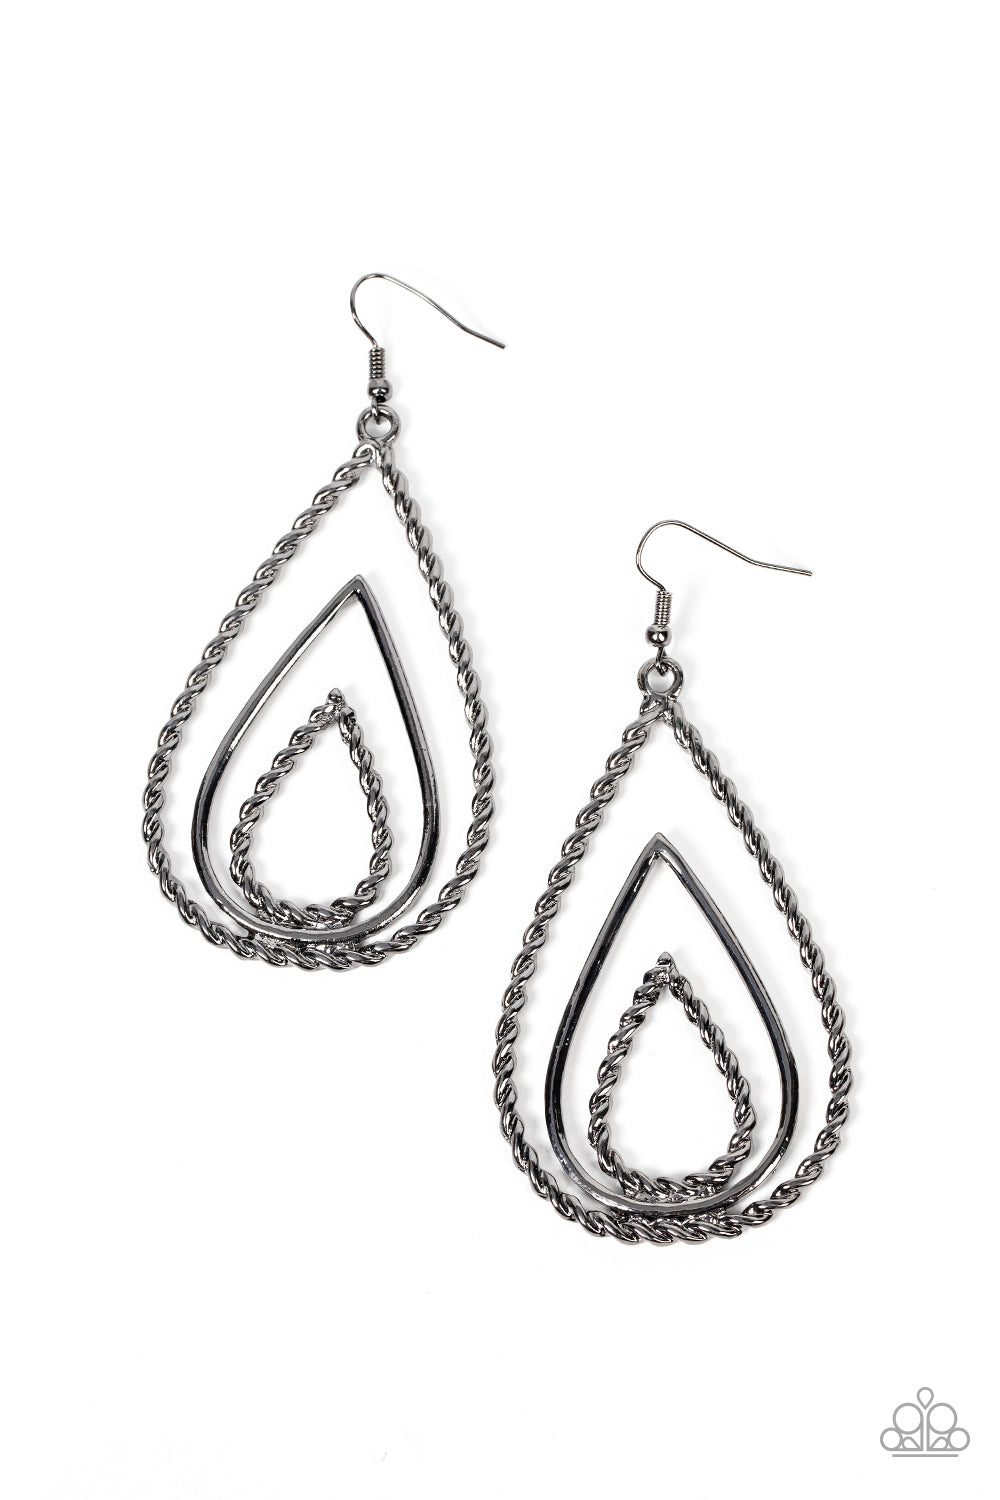 Tastefully Twisty Black Earring - Paparazzi Accessories   Smooth and twisted gunmetal teardrops stack into a rippling lure for an edgy look. Earring attaches to a standard fishhook fitting.  Sold as one pair of earrings.